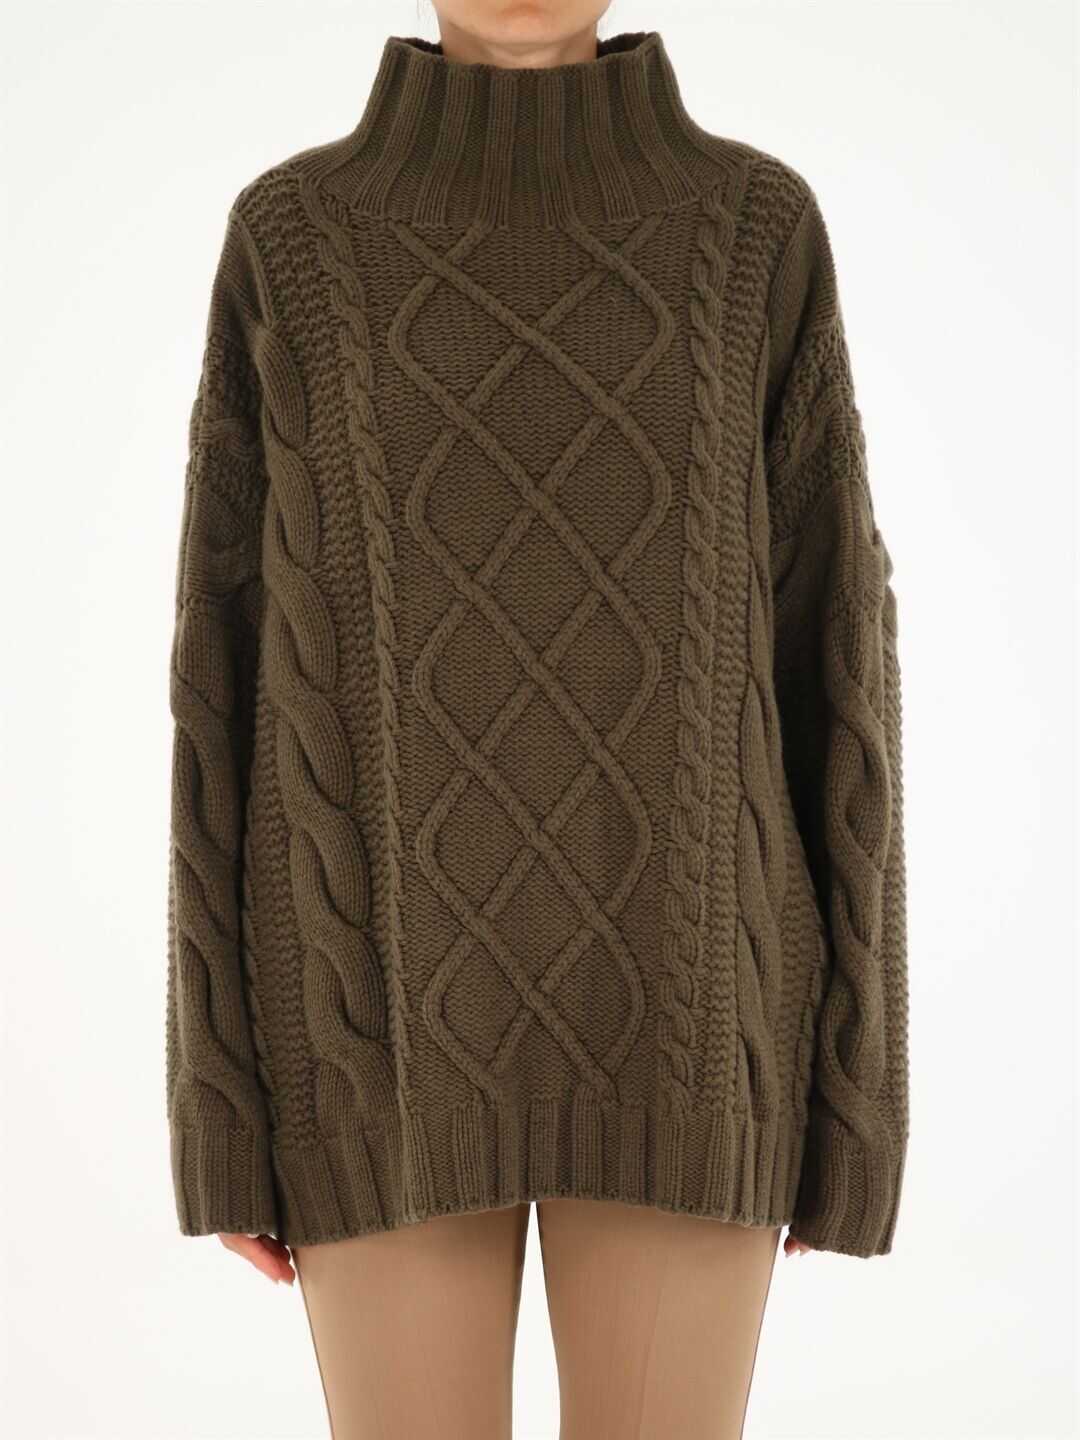 Max Mara Gettato Cable Knit Sweater And High Collar 13660216600 12147 N/A